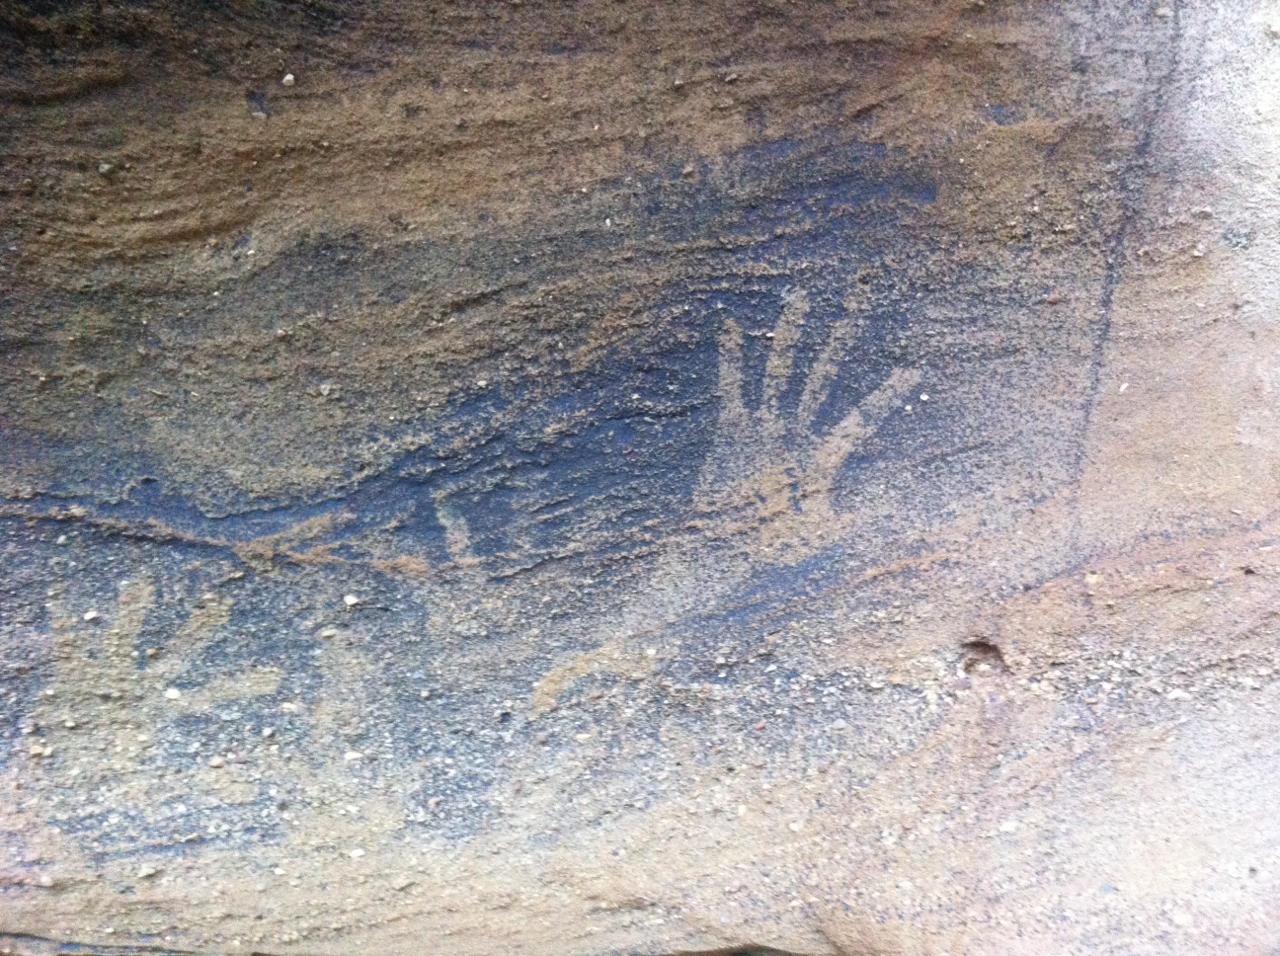 Went hiking yesterday and found a cool cave with aboriginal handprints   Wollombi,